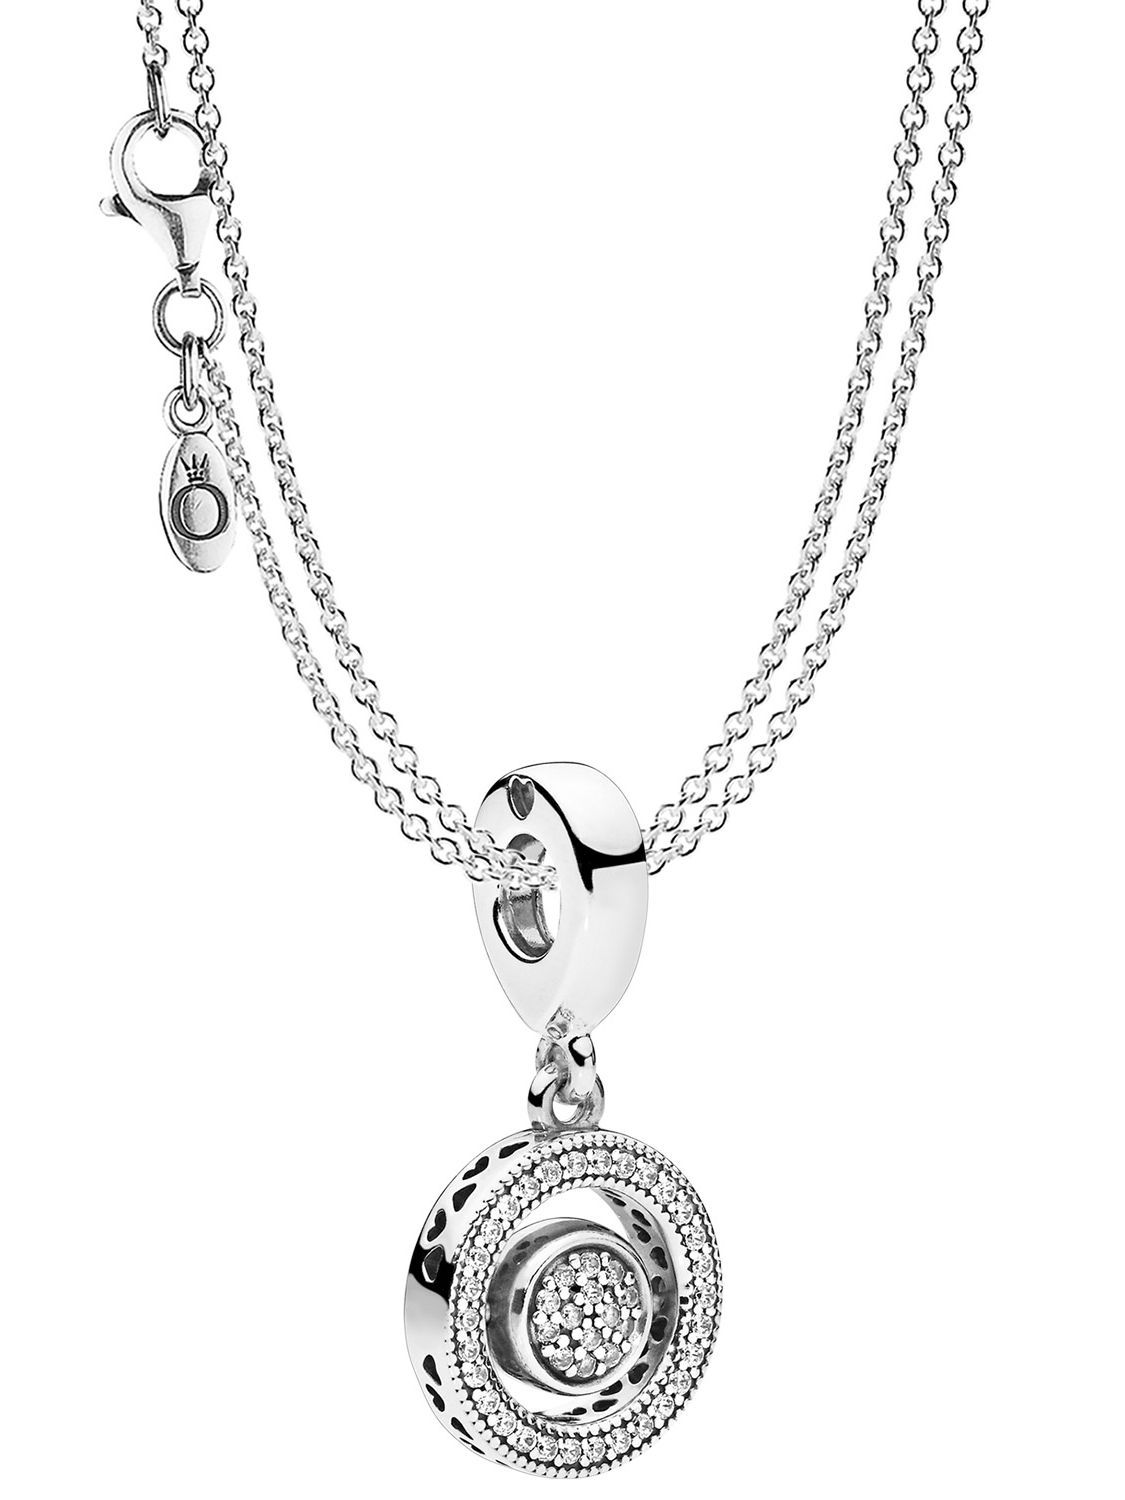 Pandora 08591 Necklace With Charm Pendant Logo Intended For Most Recently Released Pandora Lockets Logo Necklaces (View 1 of 25)